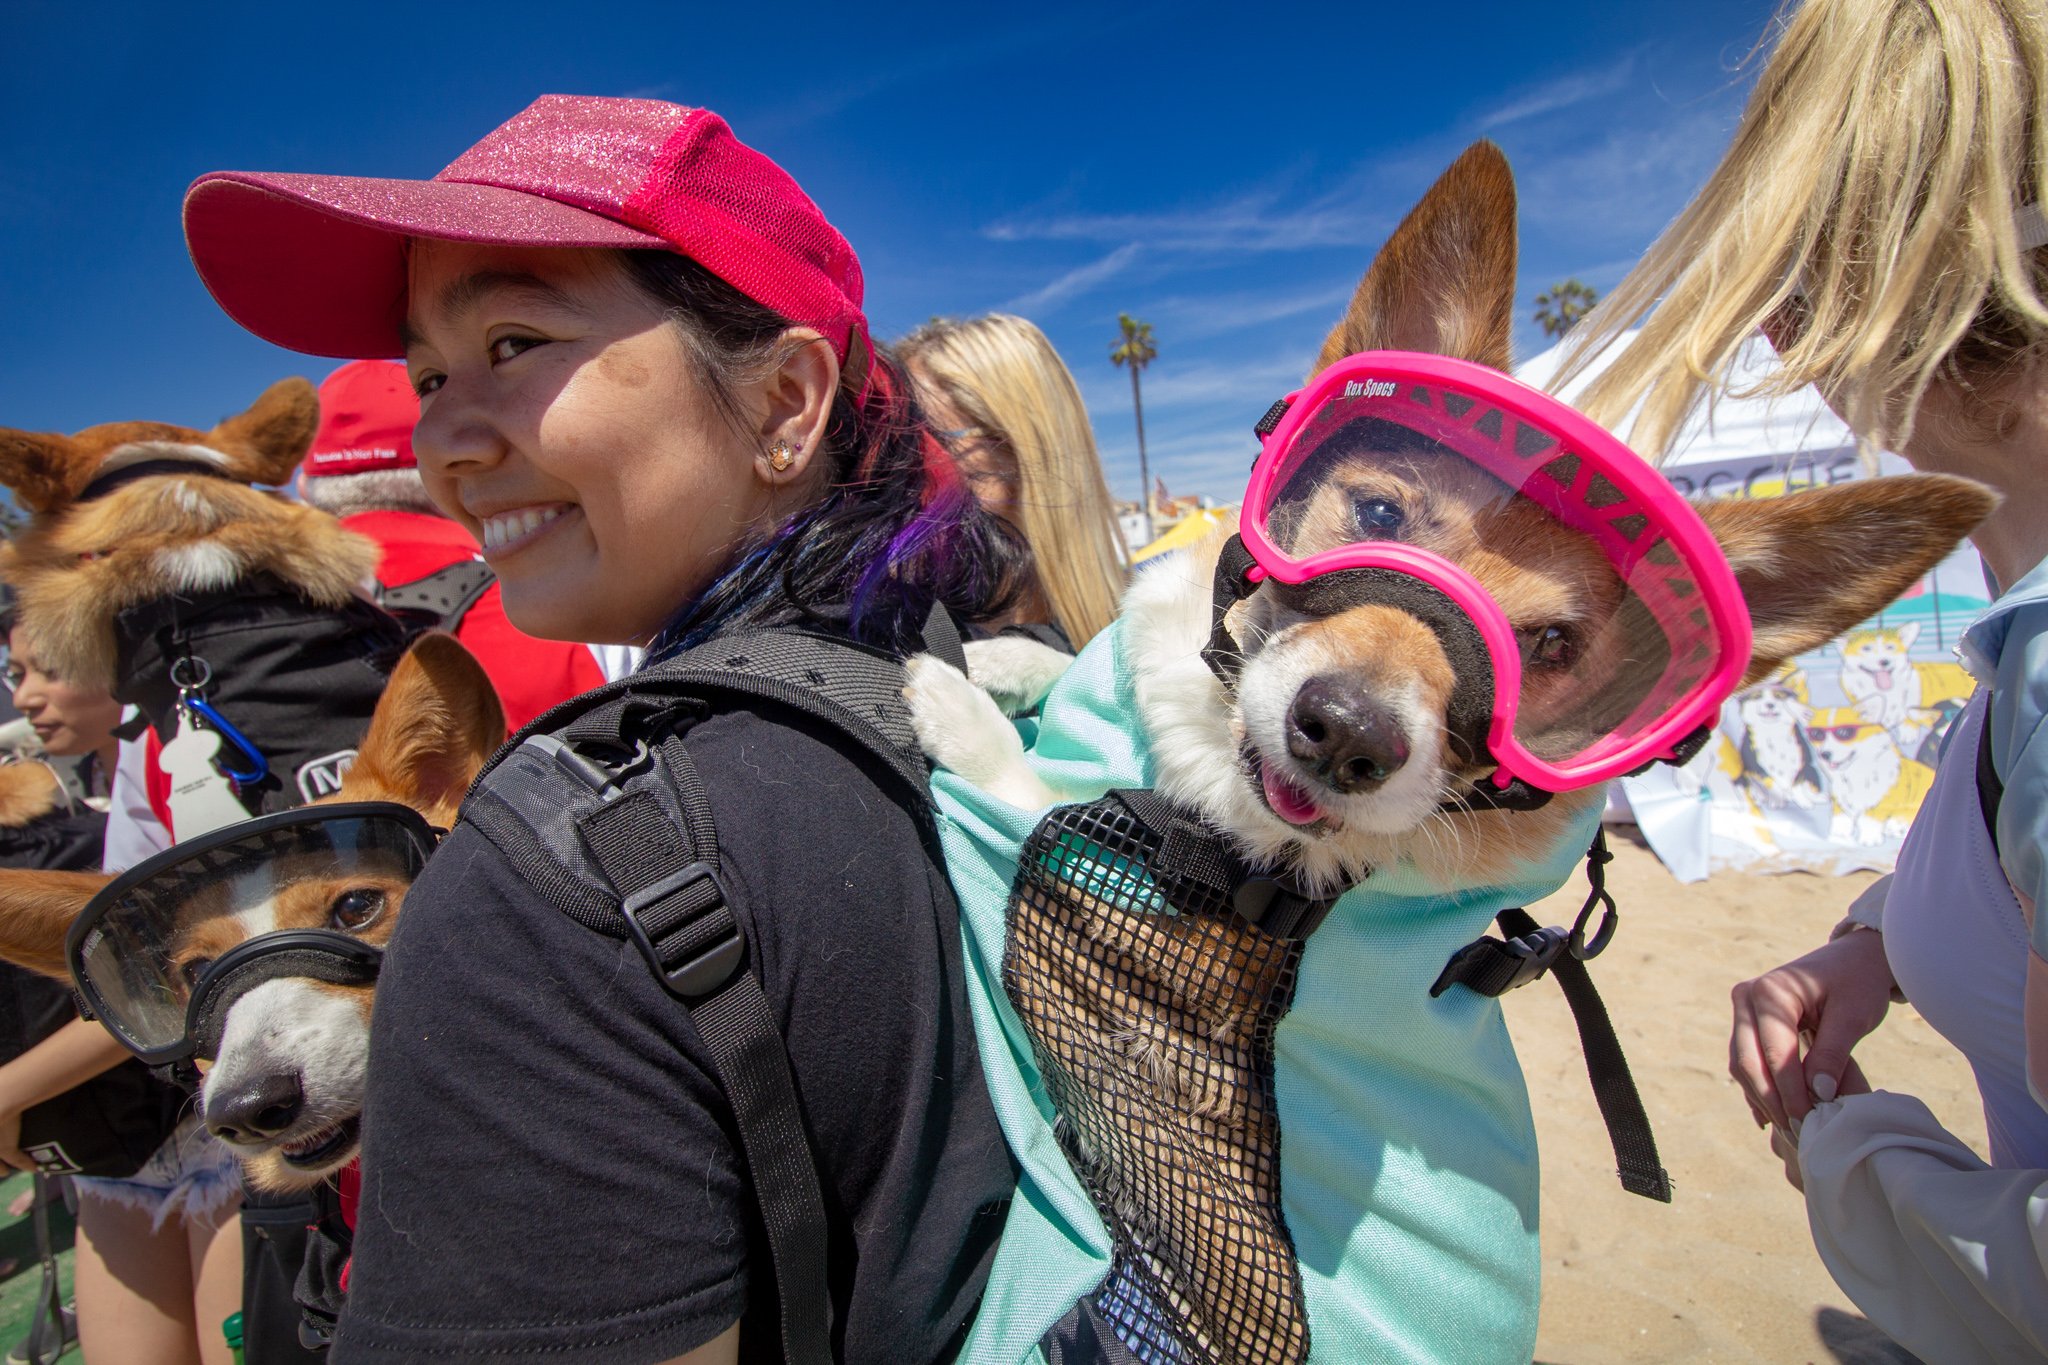 Orange County Pet and Dog Photography - by Steamer Lee - Corgi Beach Day Spring 2019 - Southern Caliornia 32 (1).JPG